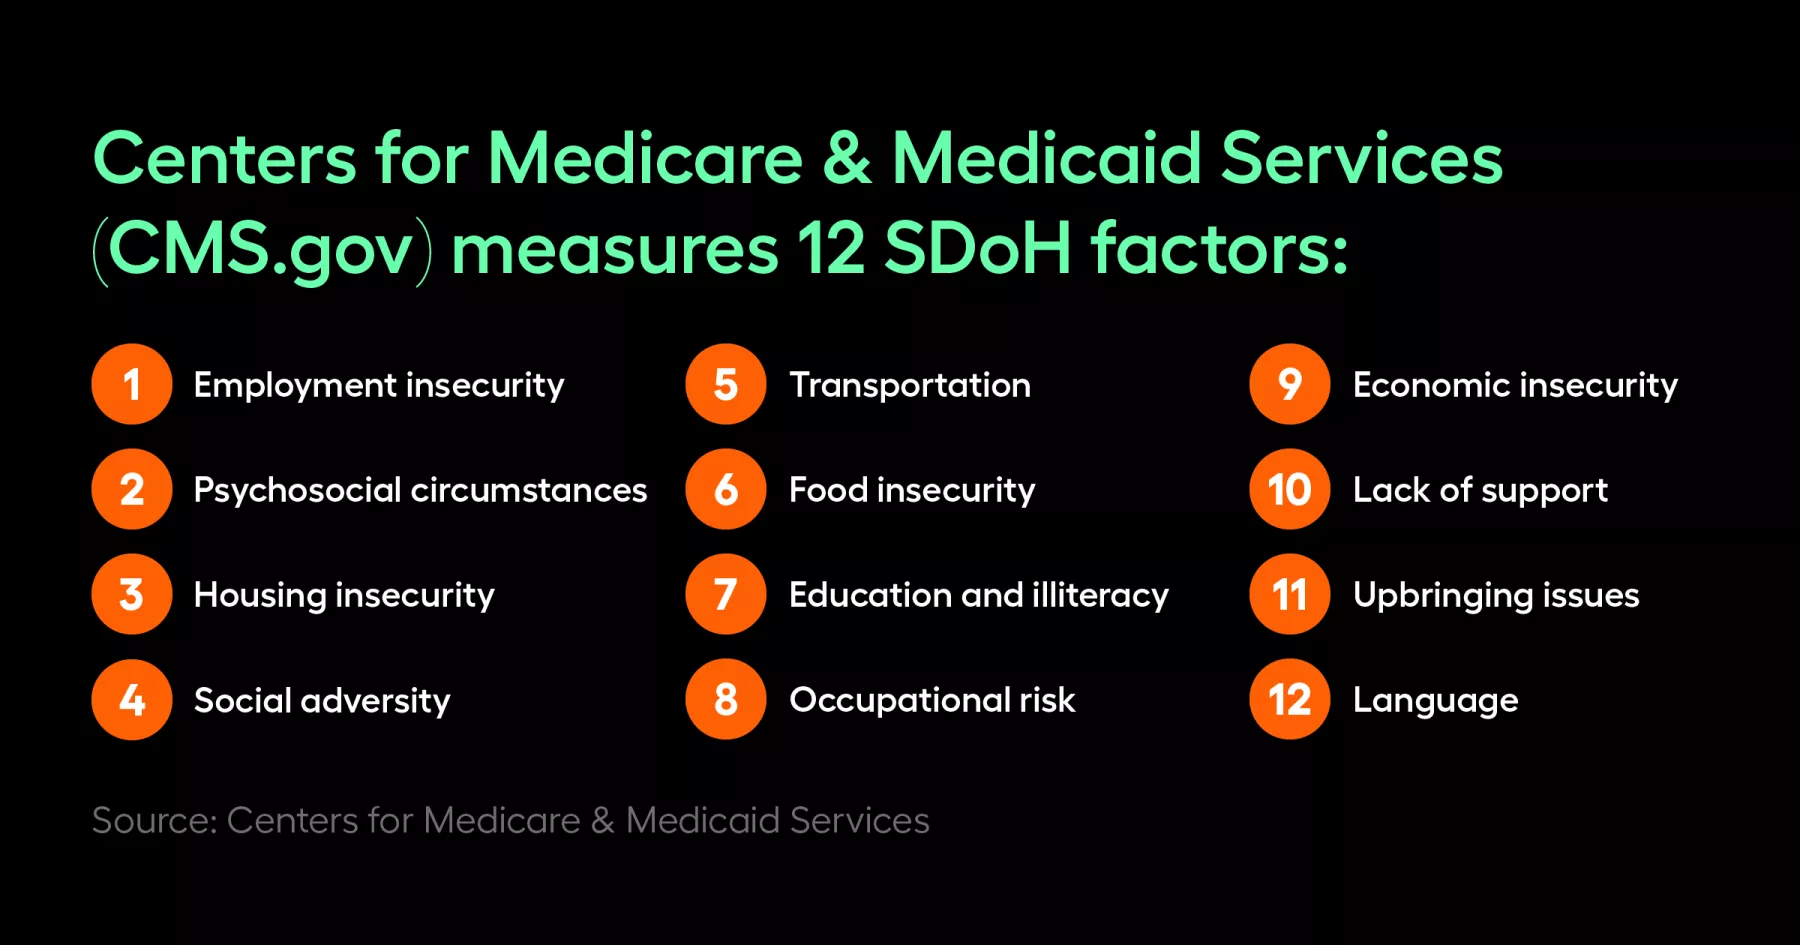 A listing of the 12 SDoH factors Centers for Medicare & Medicaid Services (CMS.gov) measures